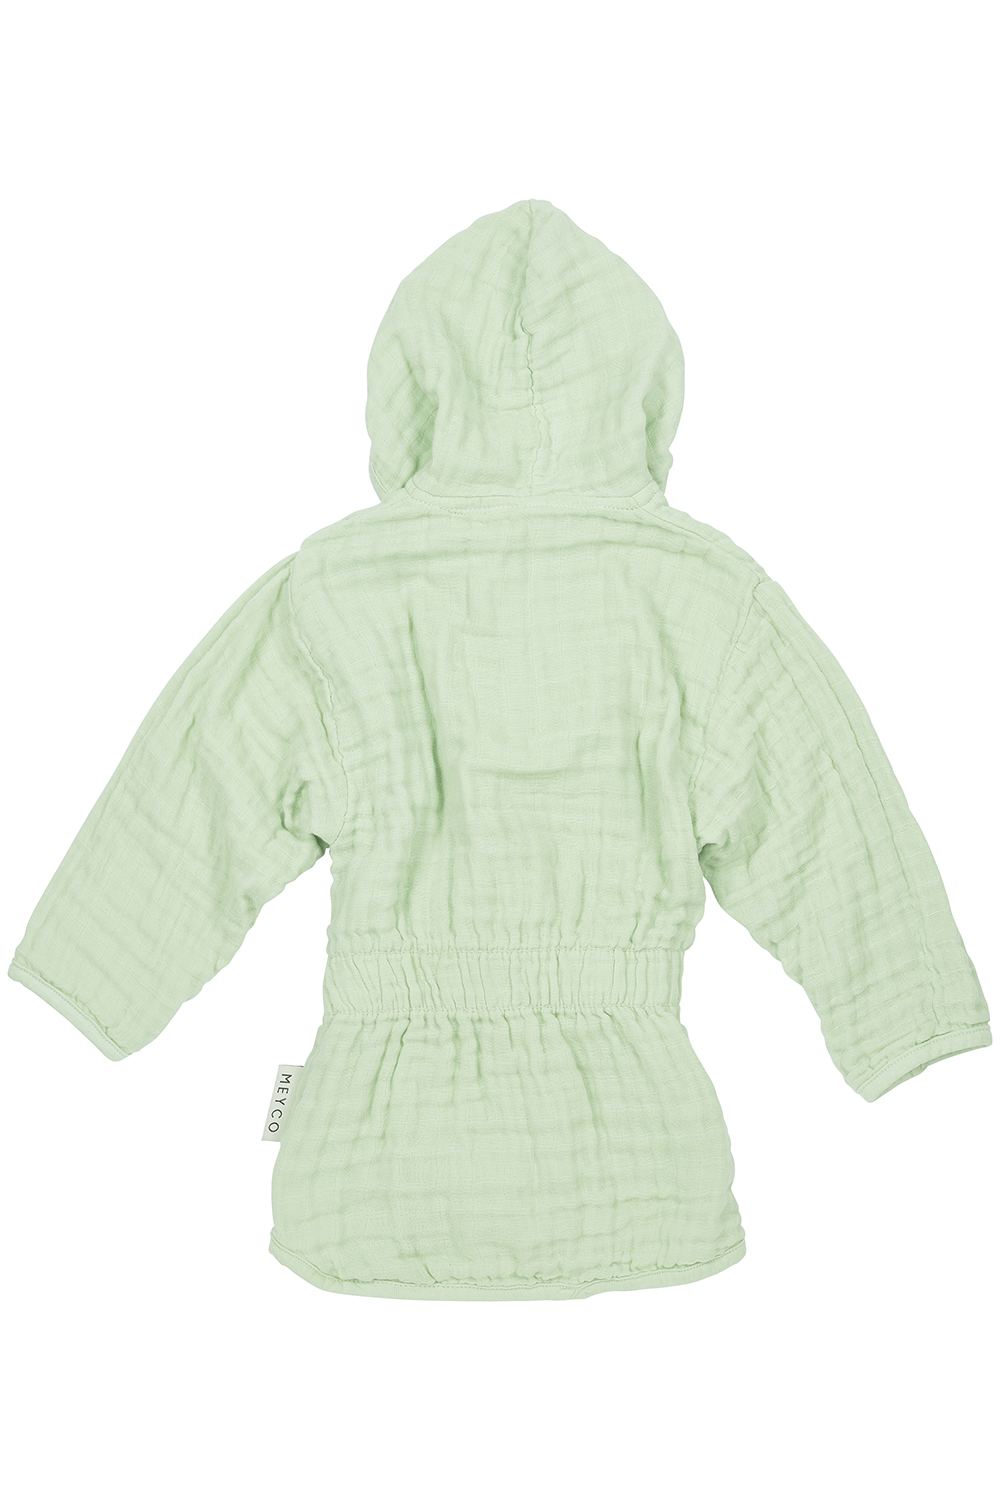 Bademantel pre-washed musselin Uni - soft green - 98/104